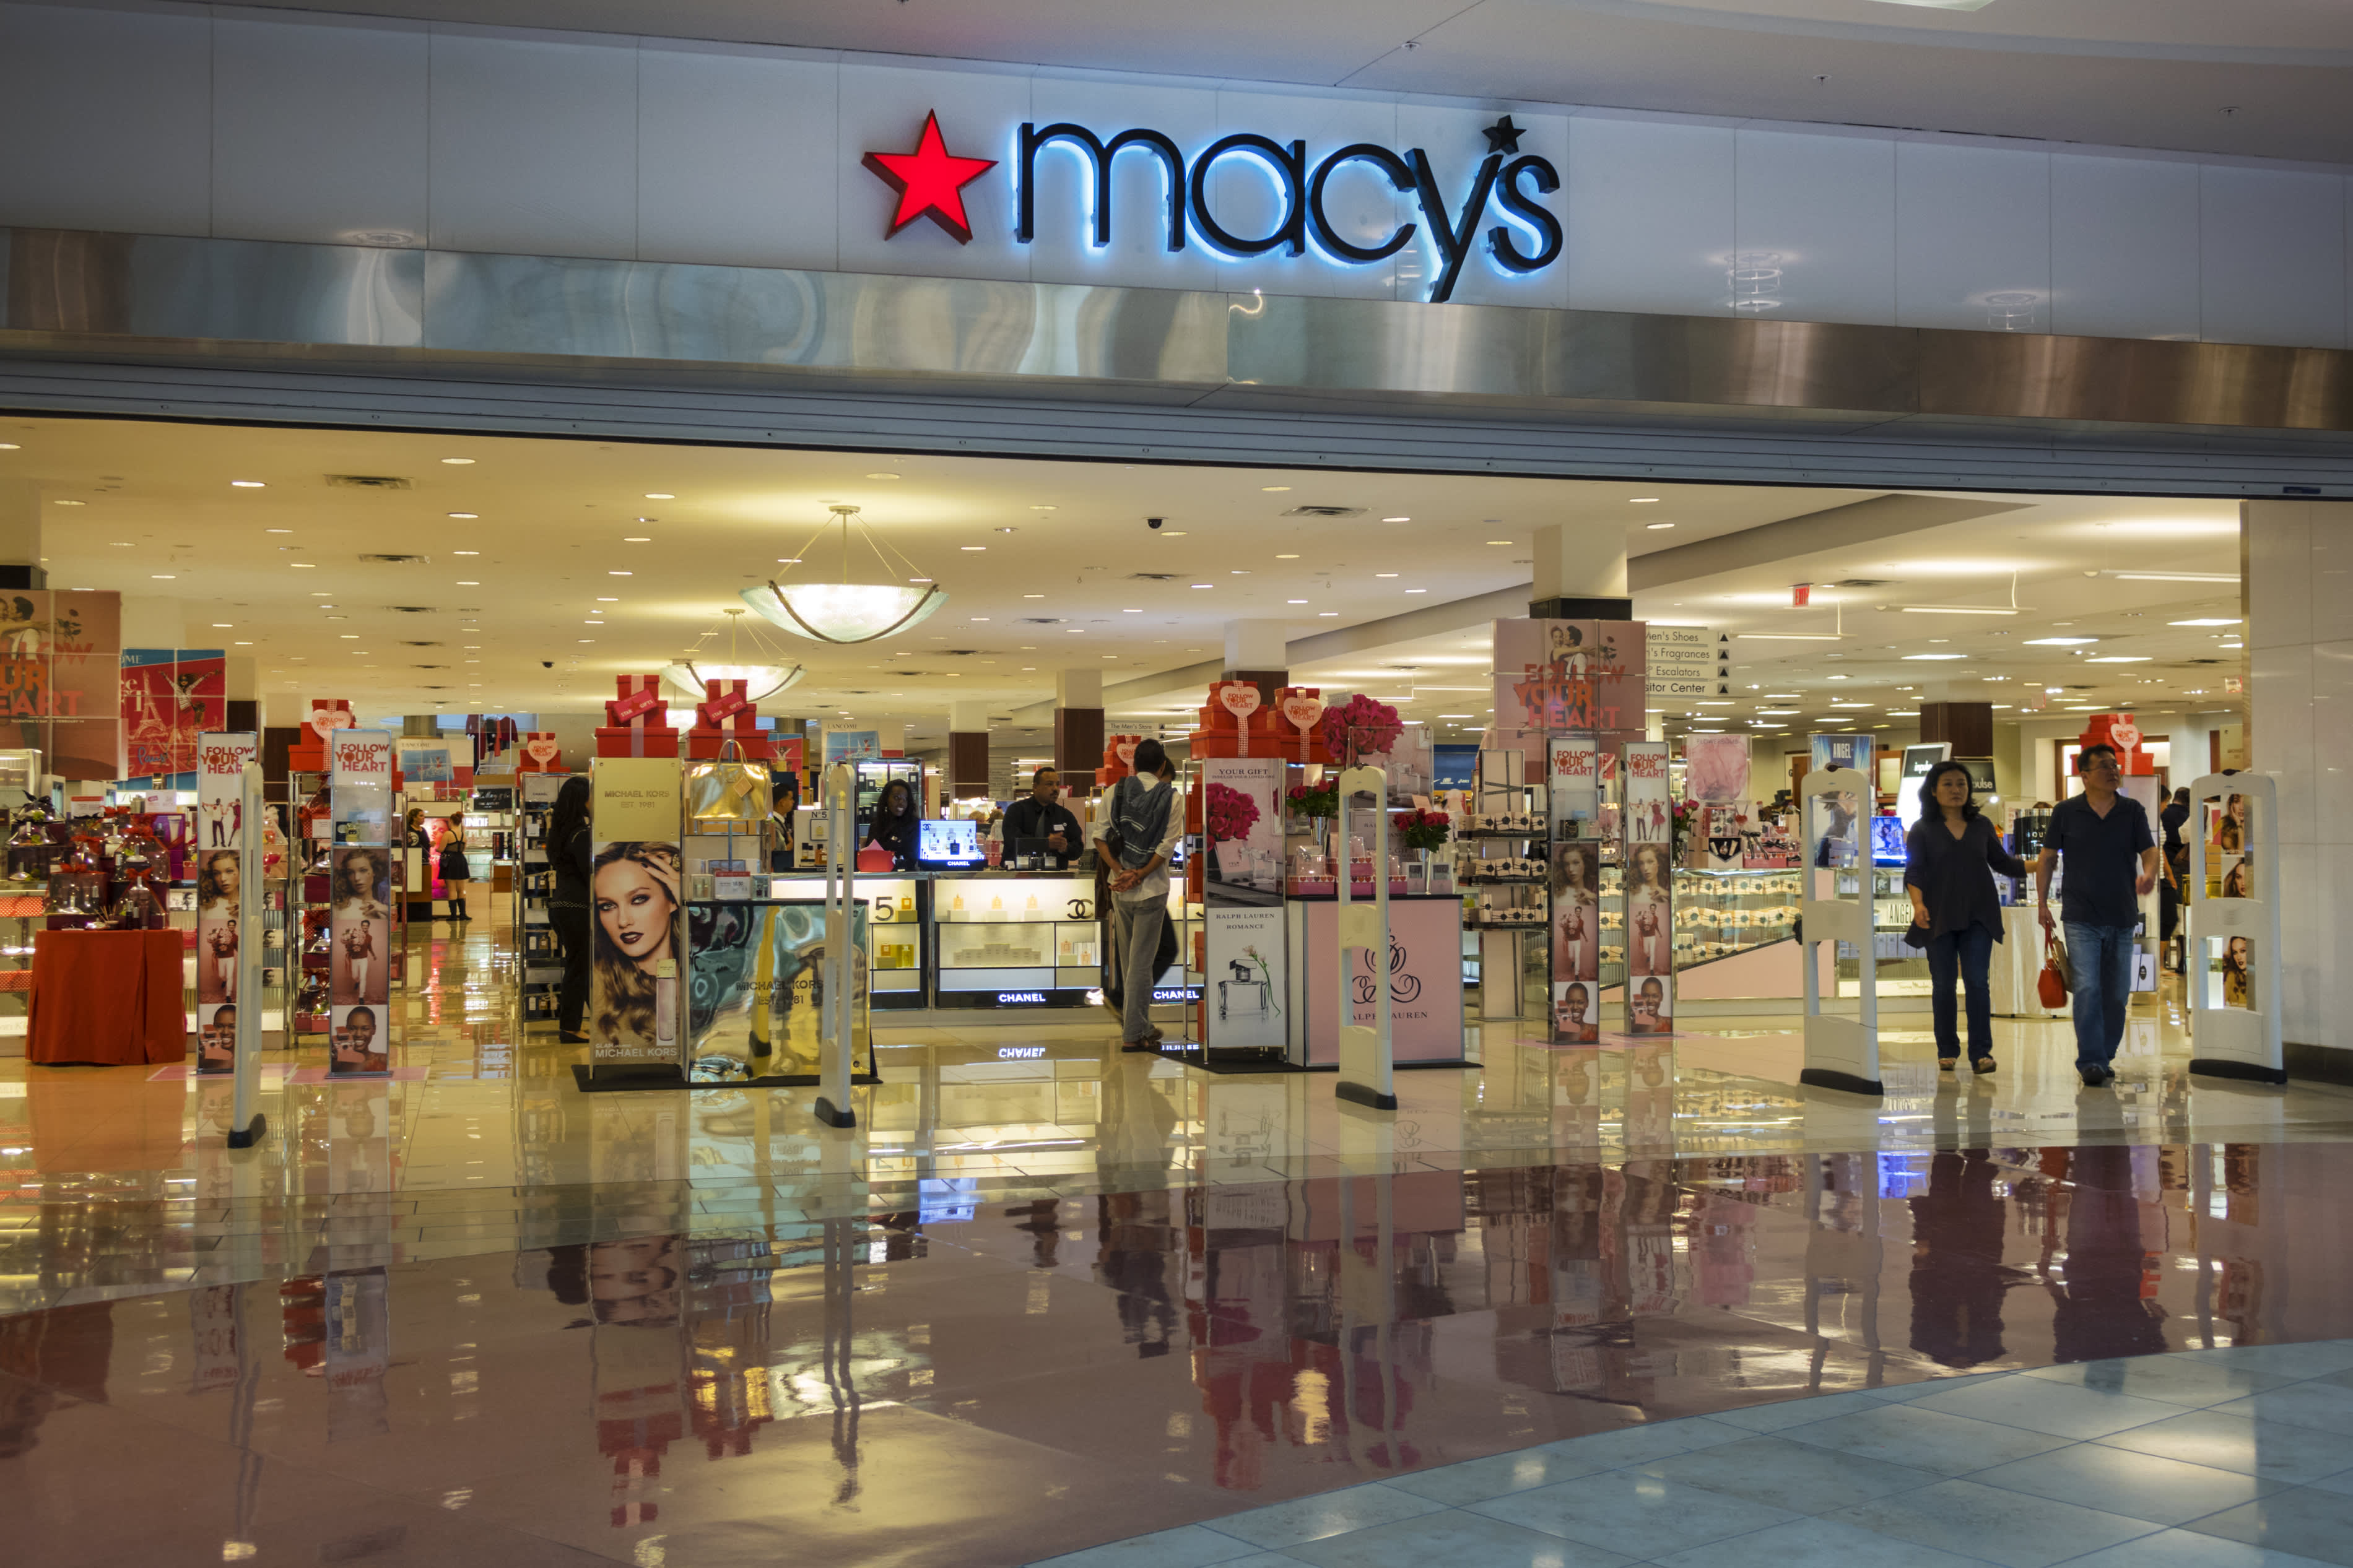 Macy's is taking 36 stores and putting a new kind of store inside them